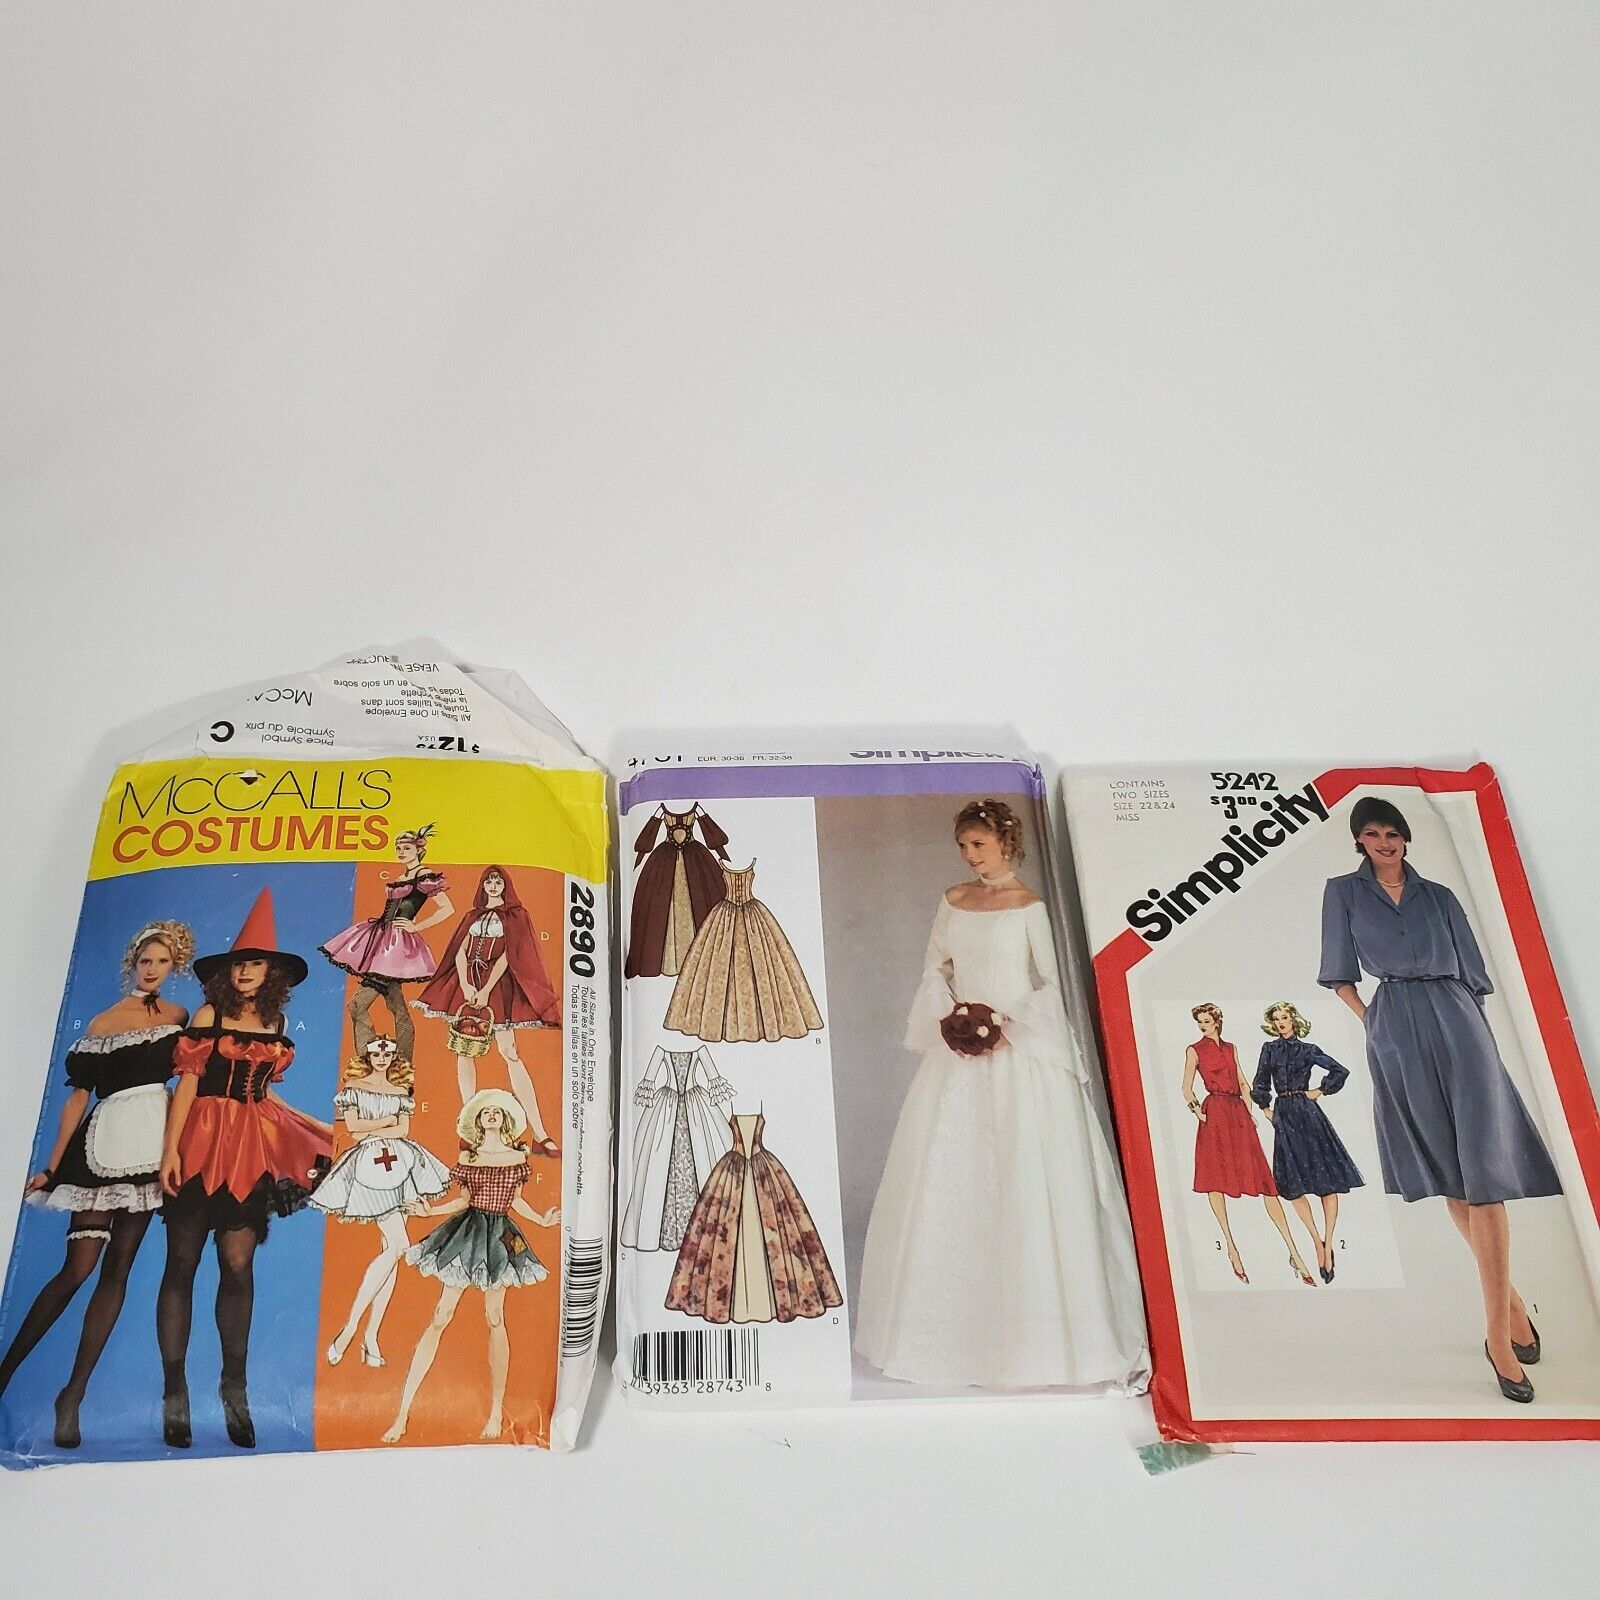 VTG MccCalls/Simplicity Sewing Patterns Halloween/Costume/Dresses 2890/5242/4731